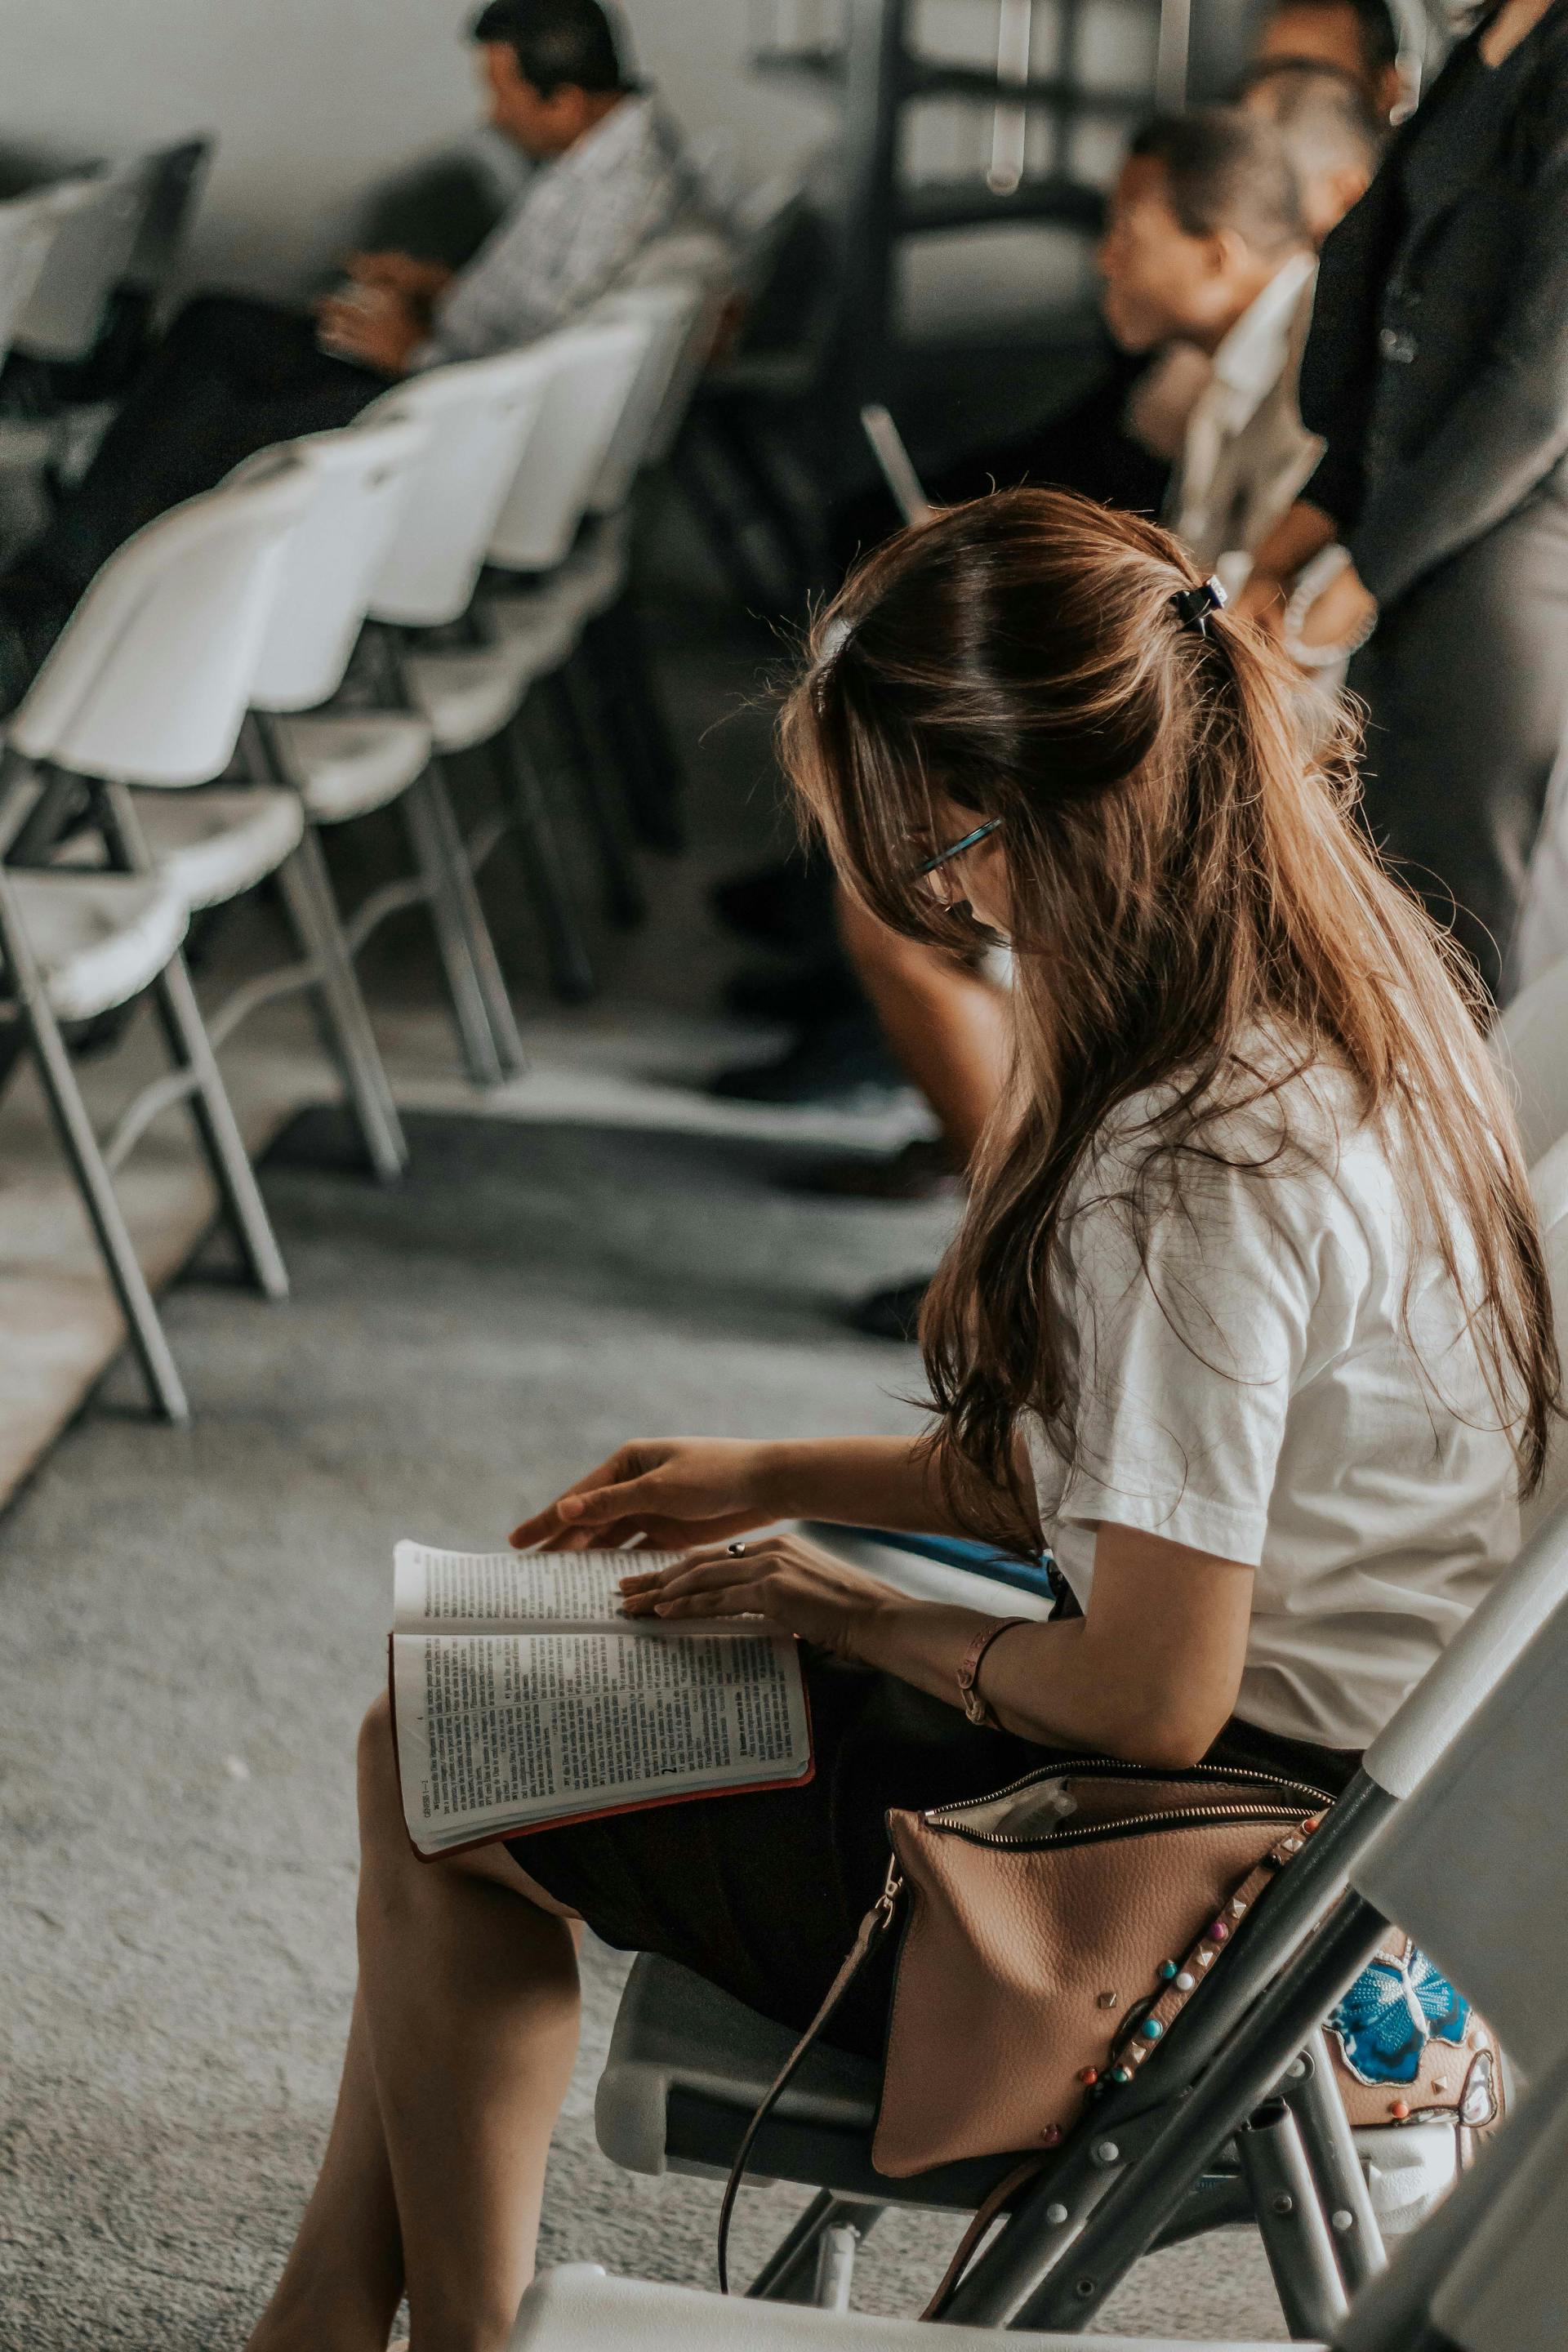 A female student sitting in the classroom | Source: Pexels